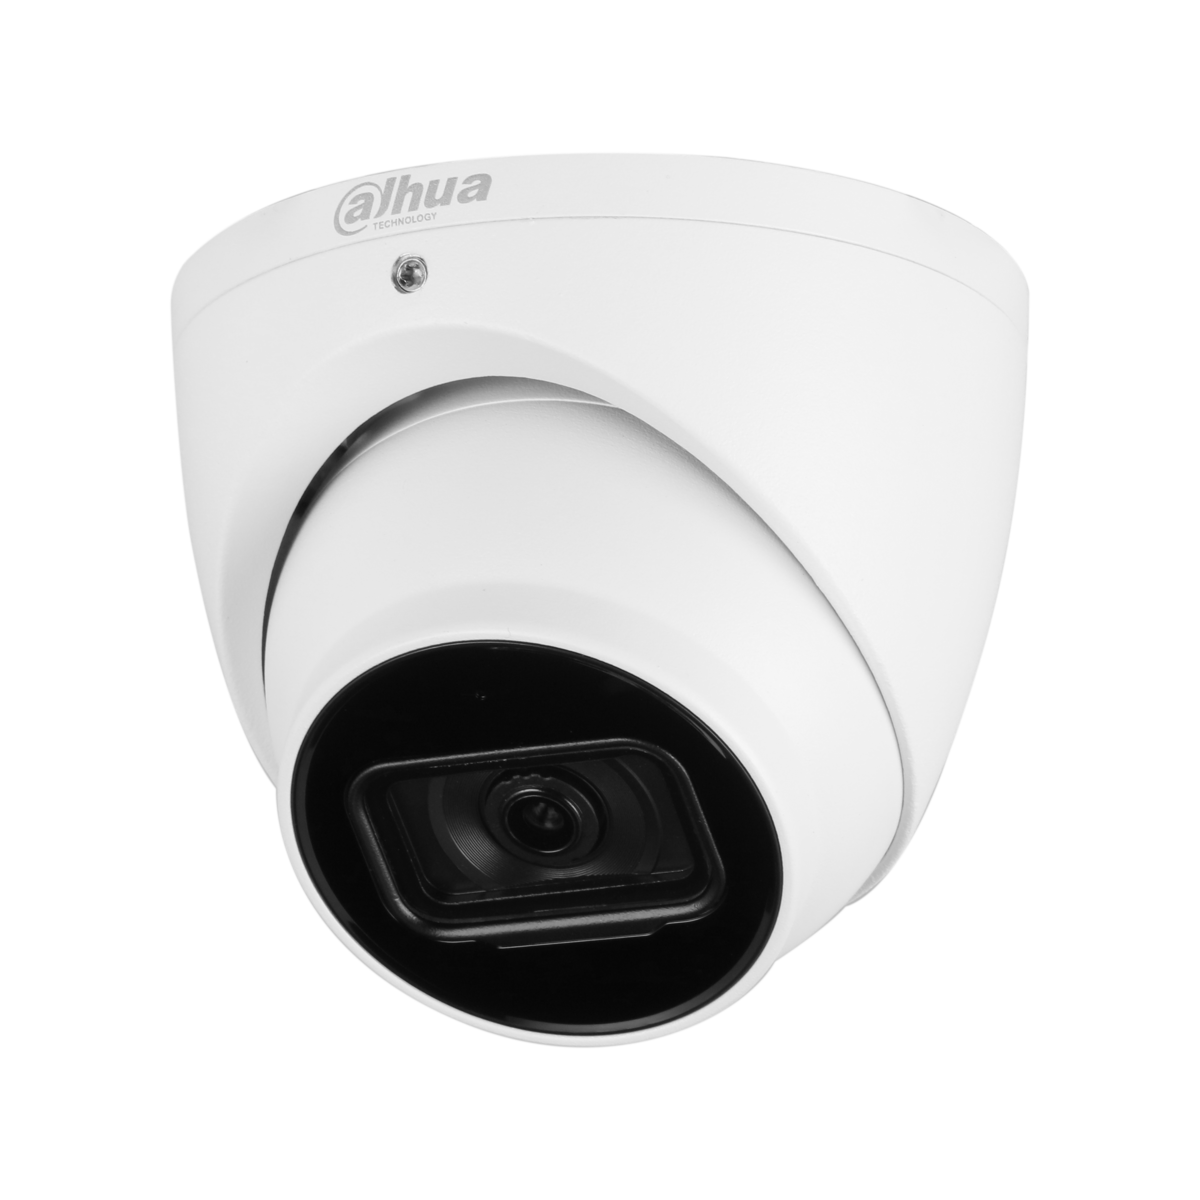 WIZSENSE SERIES IP CAMERA WHITE AI 8MP/4K H.264/4+/5/5+ TURRET 120 WDR METAL 2.8MM FIXED LENS STARLIGHT IR 30M POE IP67 BUILT IN MIC SUPPORT UP TO 256GB SD 12VDC